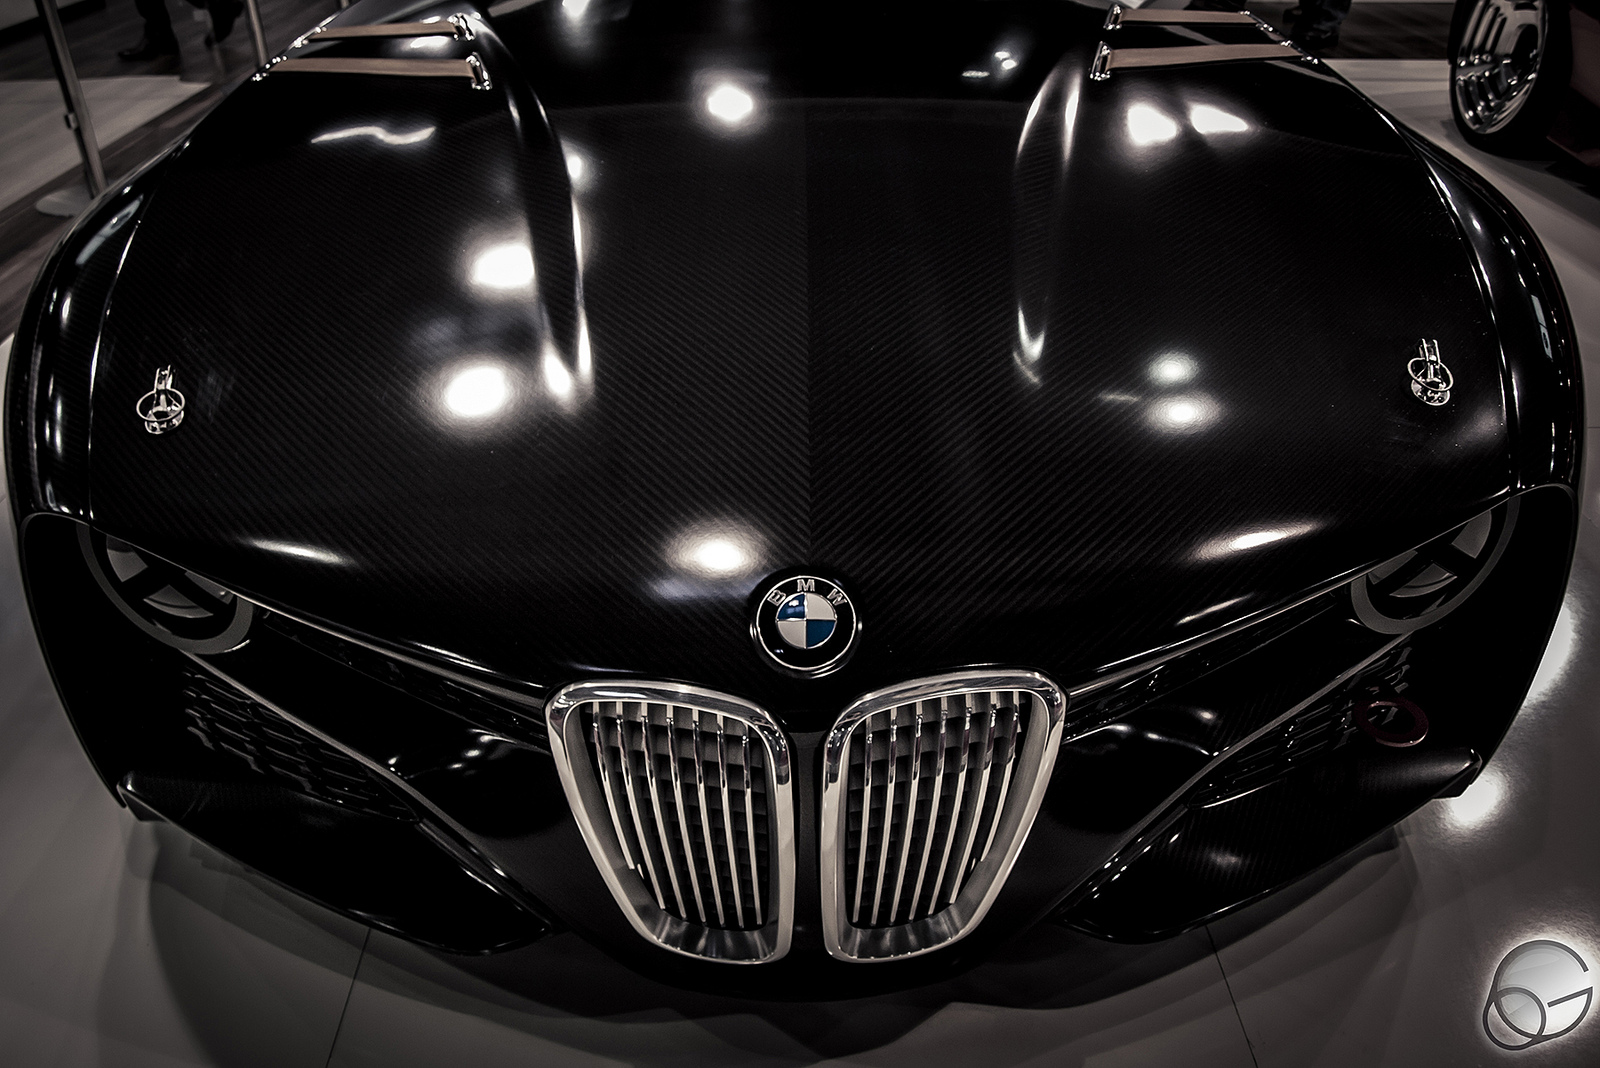 BMW 328 Roadster | Flickr - Photo Sharing!